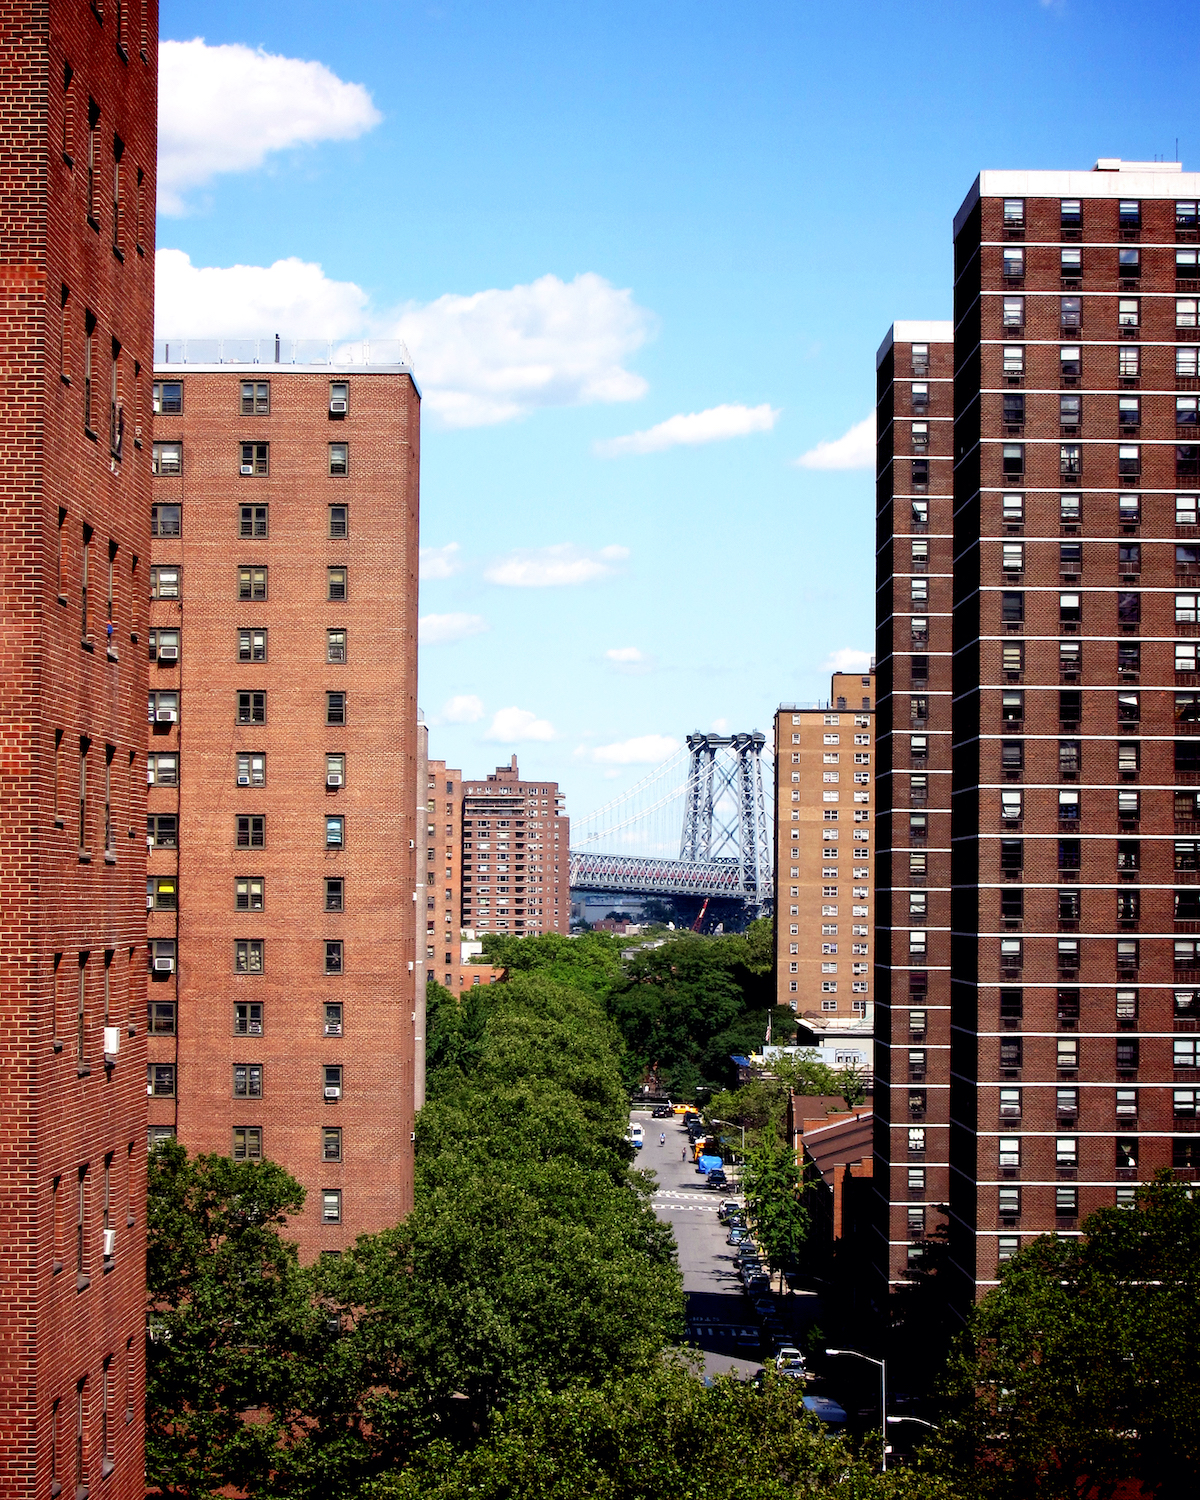 Multi story brick apartment buildings on New York City's Lower East Side